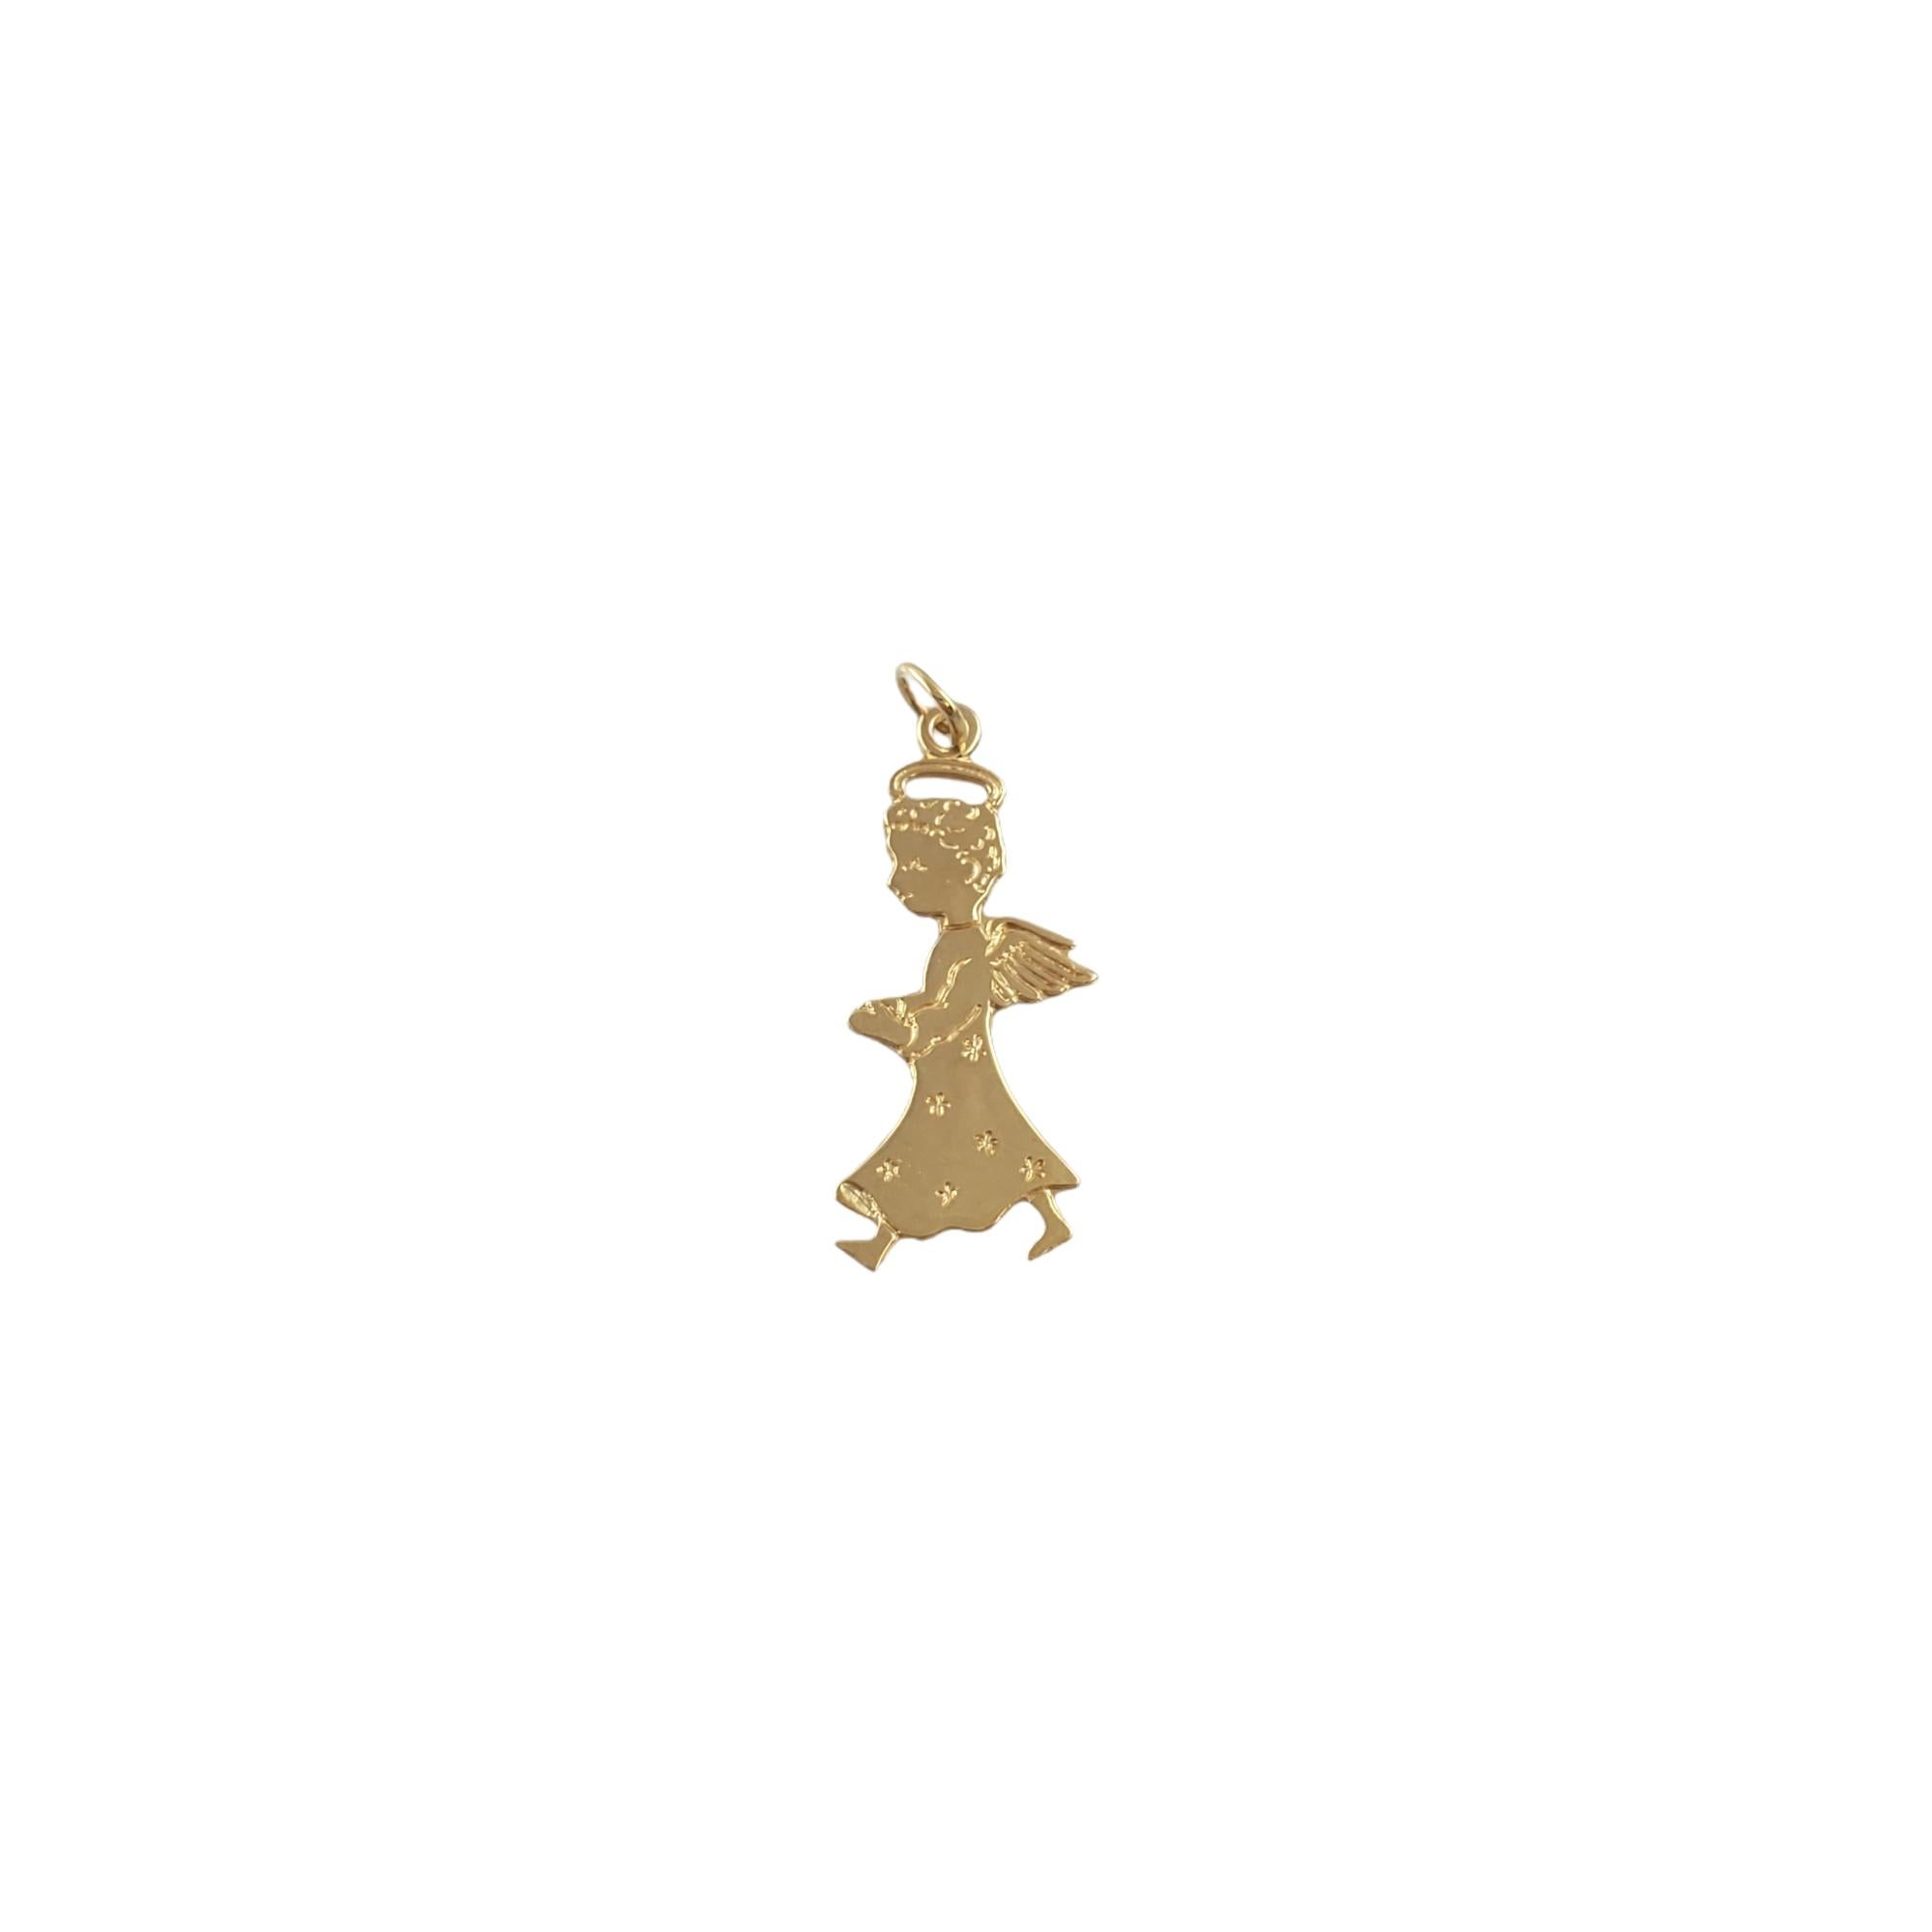 14K Yellow Gold Angel Charm 

Beautiful vintage 14k yellow gold angel charm for the angel in your life. 

Size: 12.88mm X 25.04mm

Weight:  1.4gr /  0.9dwt

Hallmark: 14K

Very good condition, professionally polished.

Will come packaged in a gift